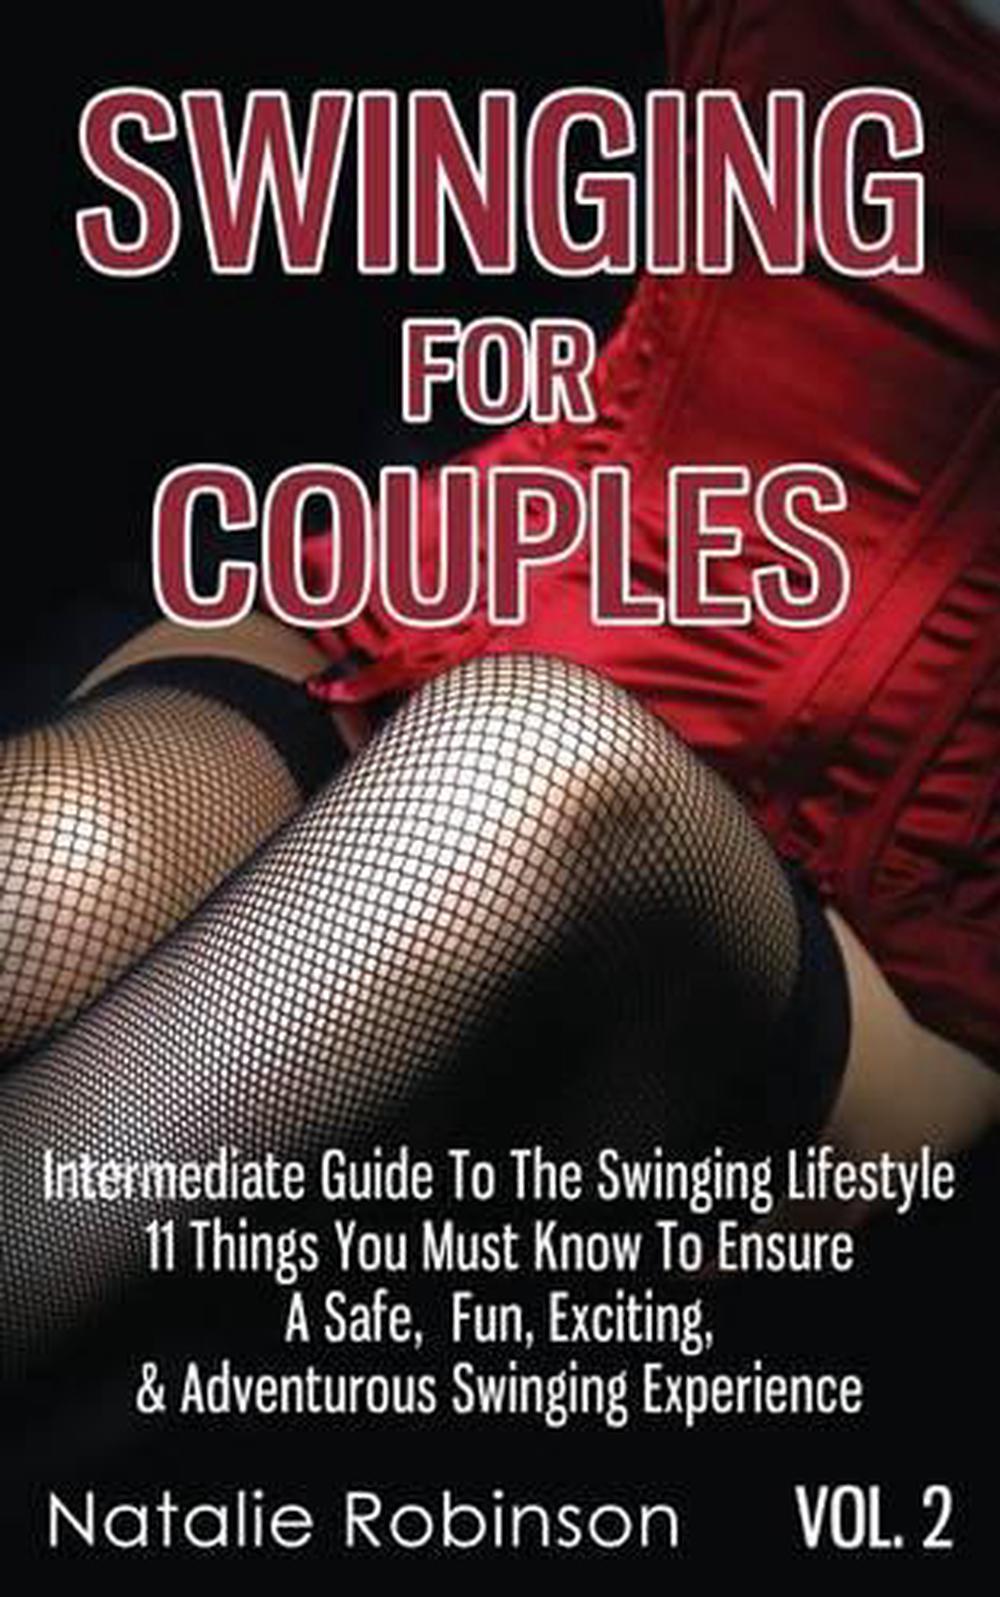 Swinging For Couples Vol 2 The Intermediate Guide To The Swinging